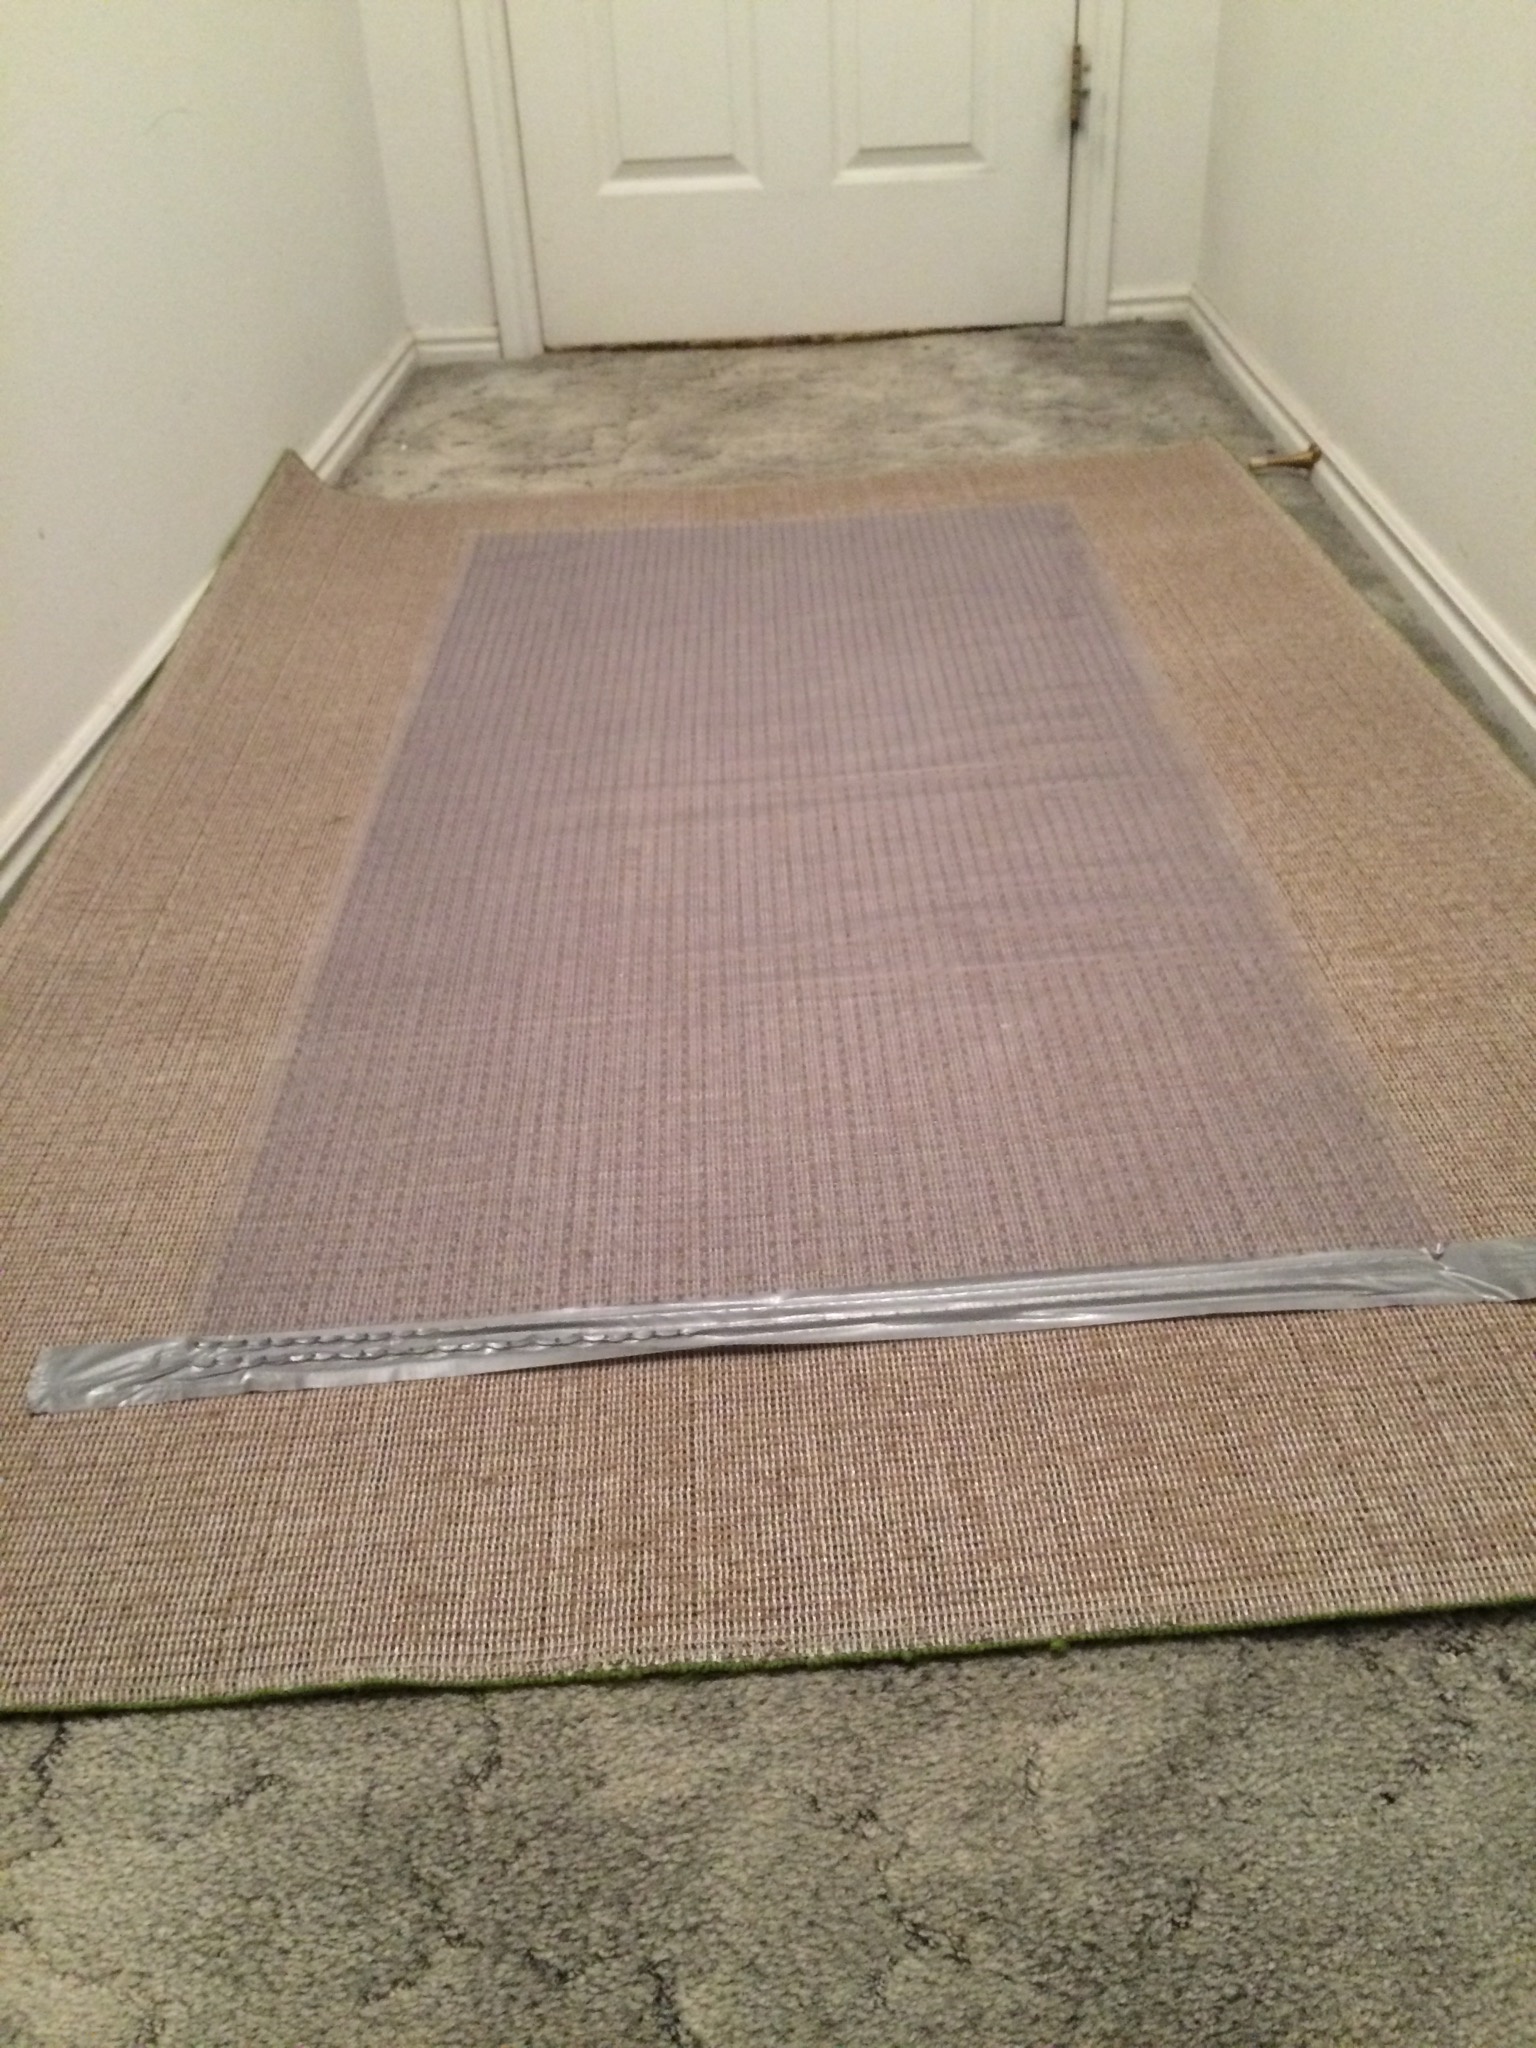 How To Secure An Area Rug Over Carpet, How To Keep Area Rug Down On Carpet